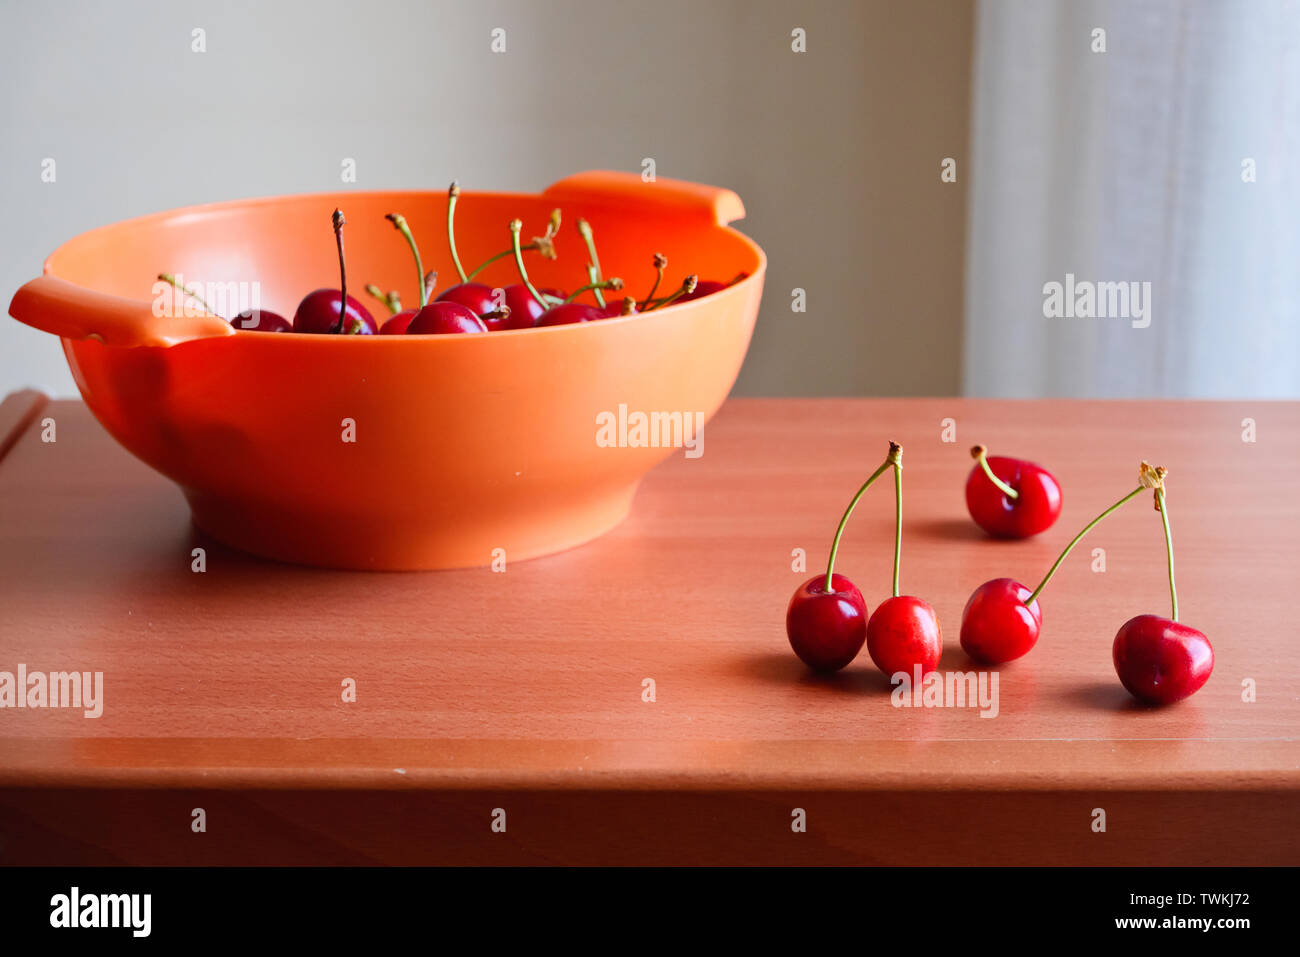 Cherries on the wooden table Stock Photo